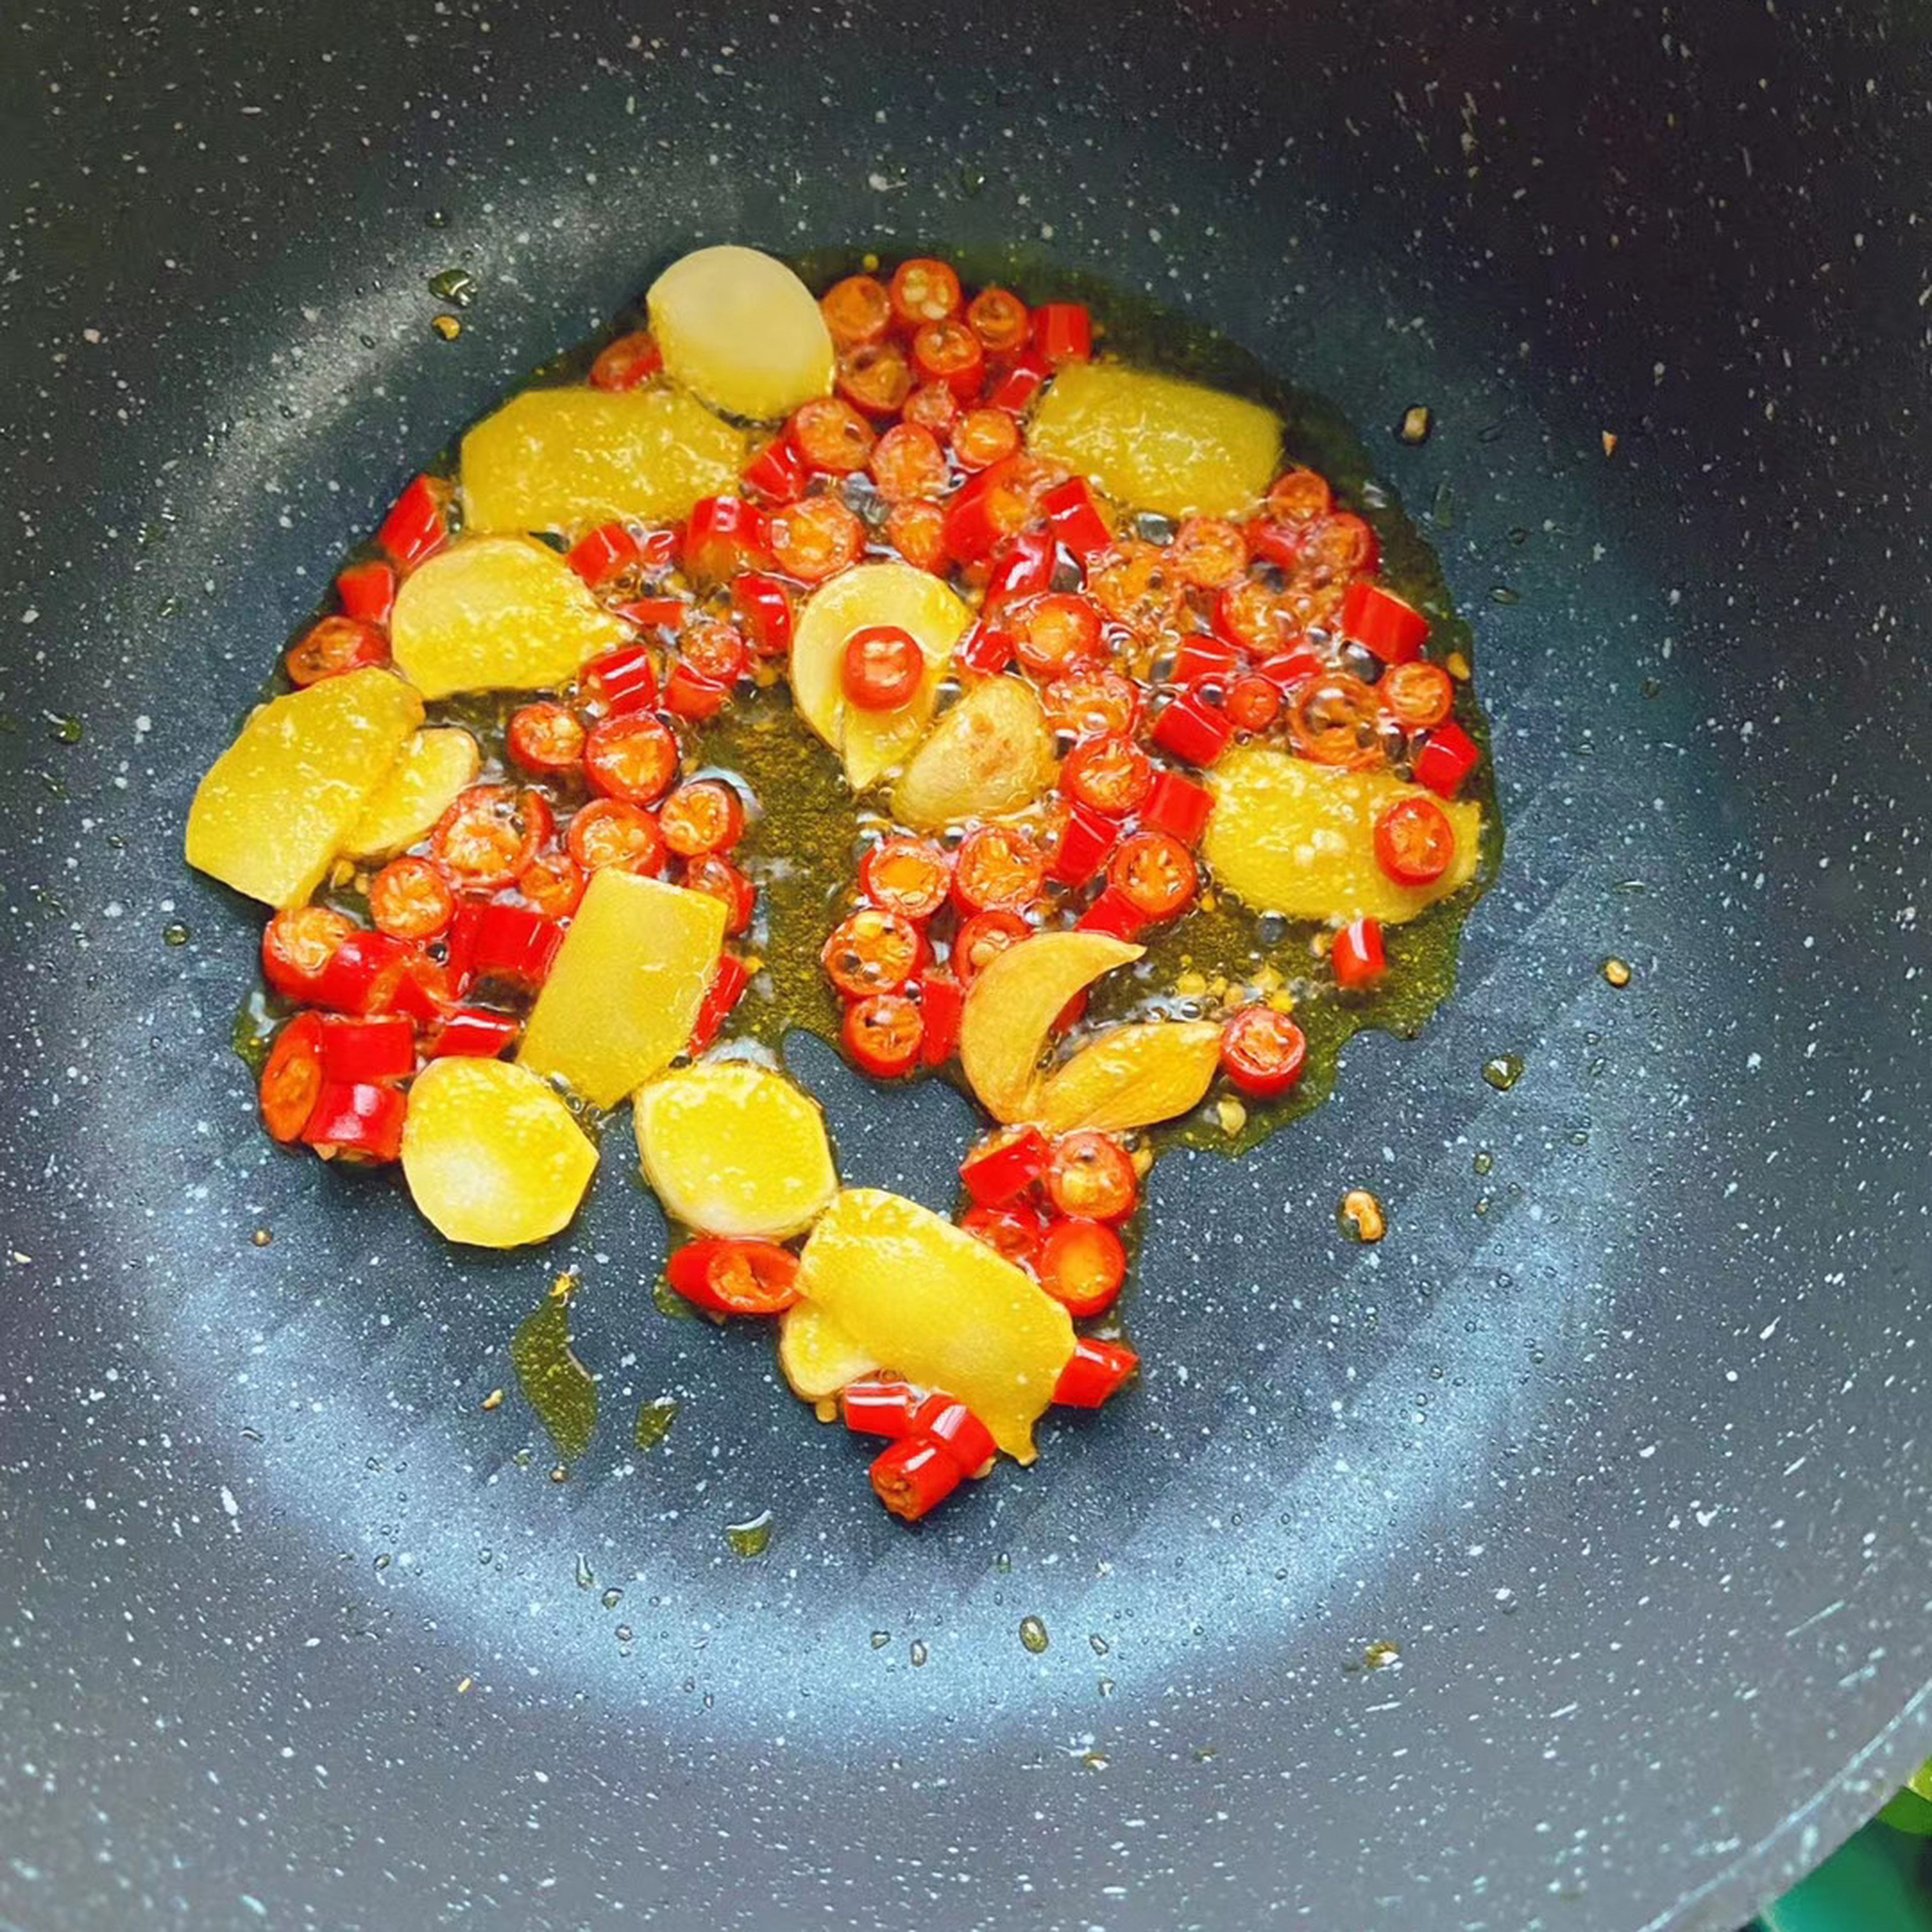 Add canola oil to a frying pan and sauté ginger, garlic and fresh chilis.